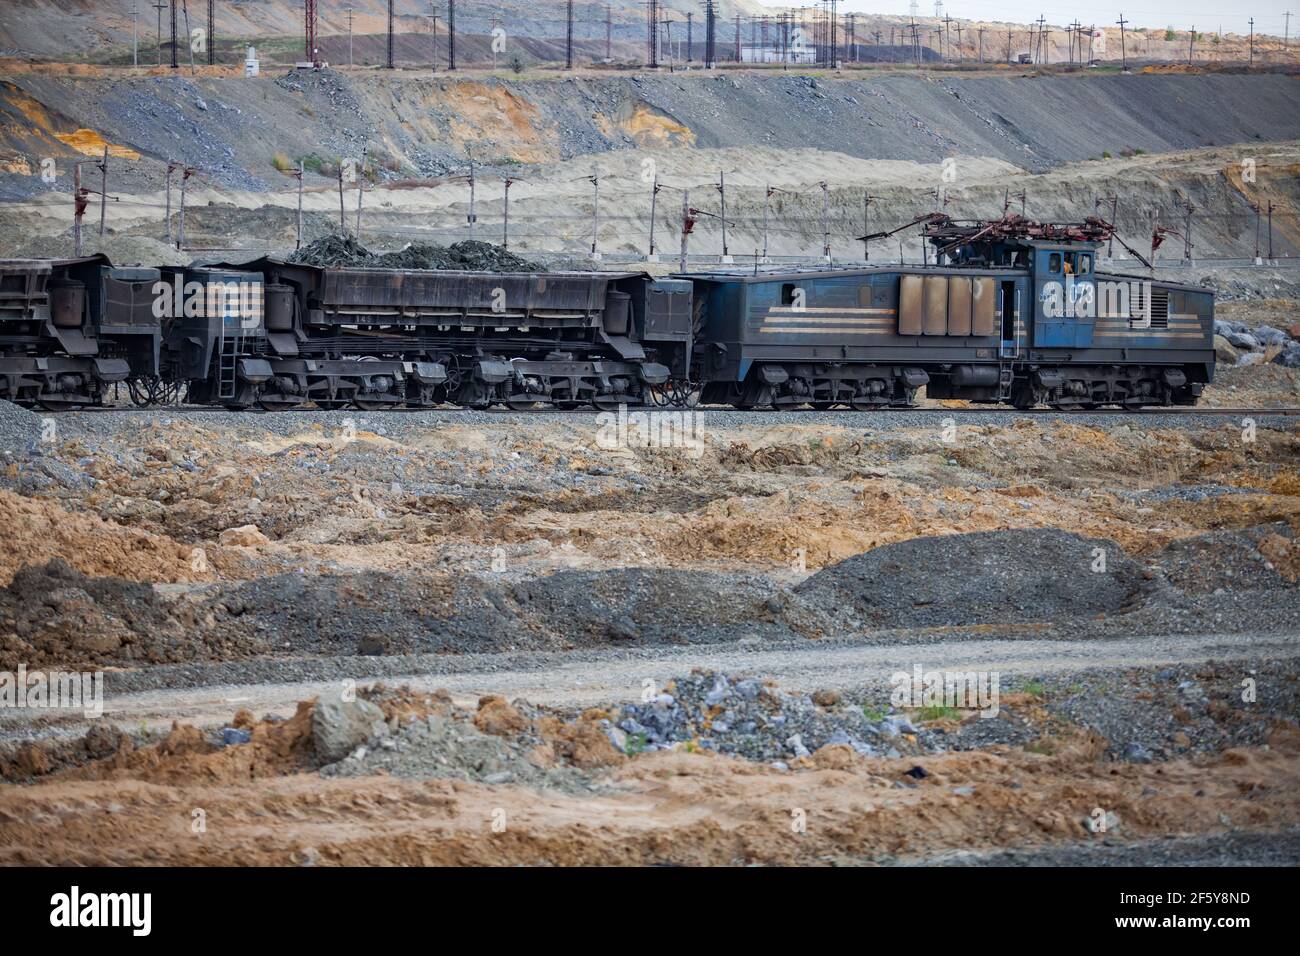 Rudny/Kazakhstan - May 14 2012:  Open-pit mining iron ore. Railway  train and diesel locomotive in quarry transporting ore in wagons to concentrating Stock Photo